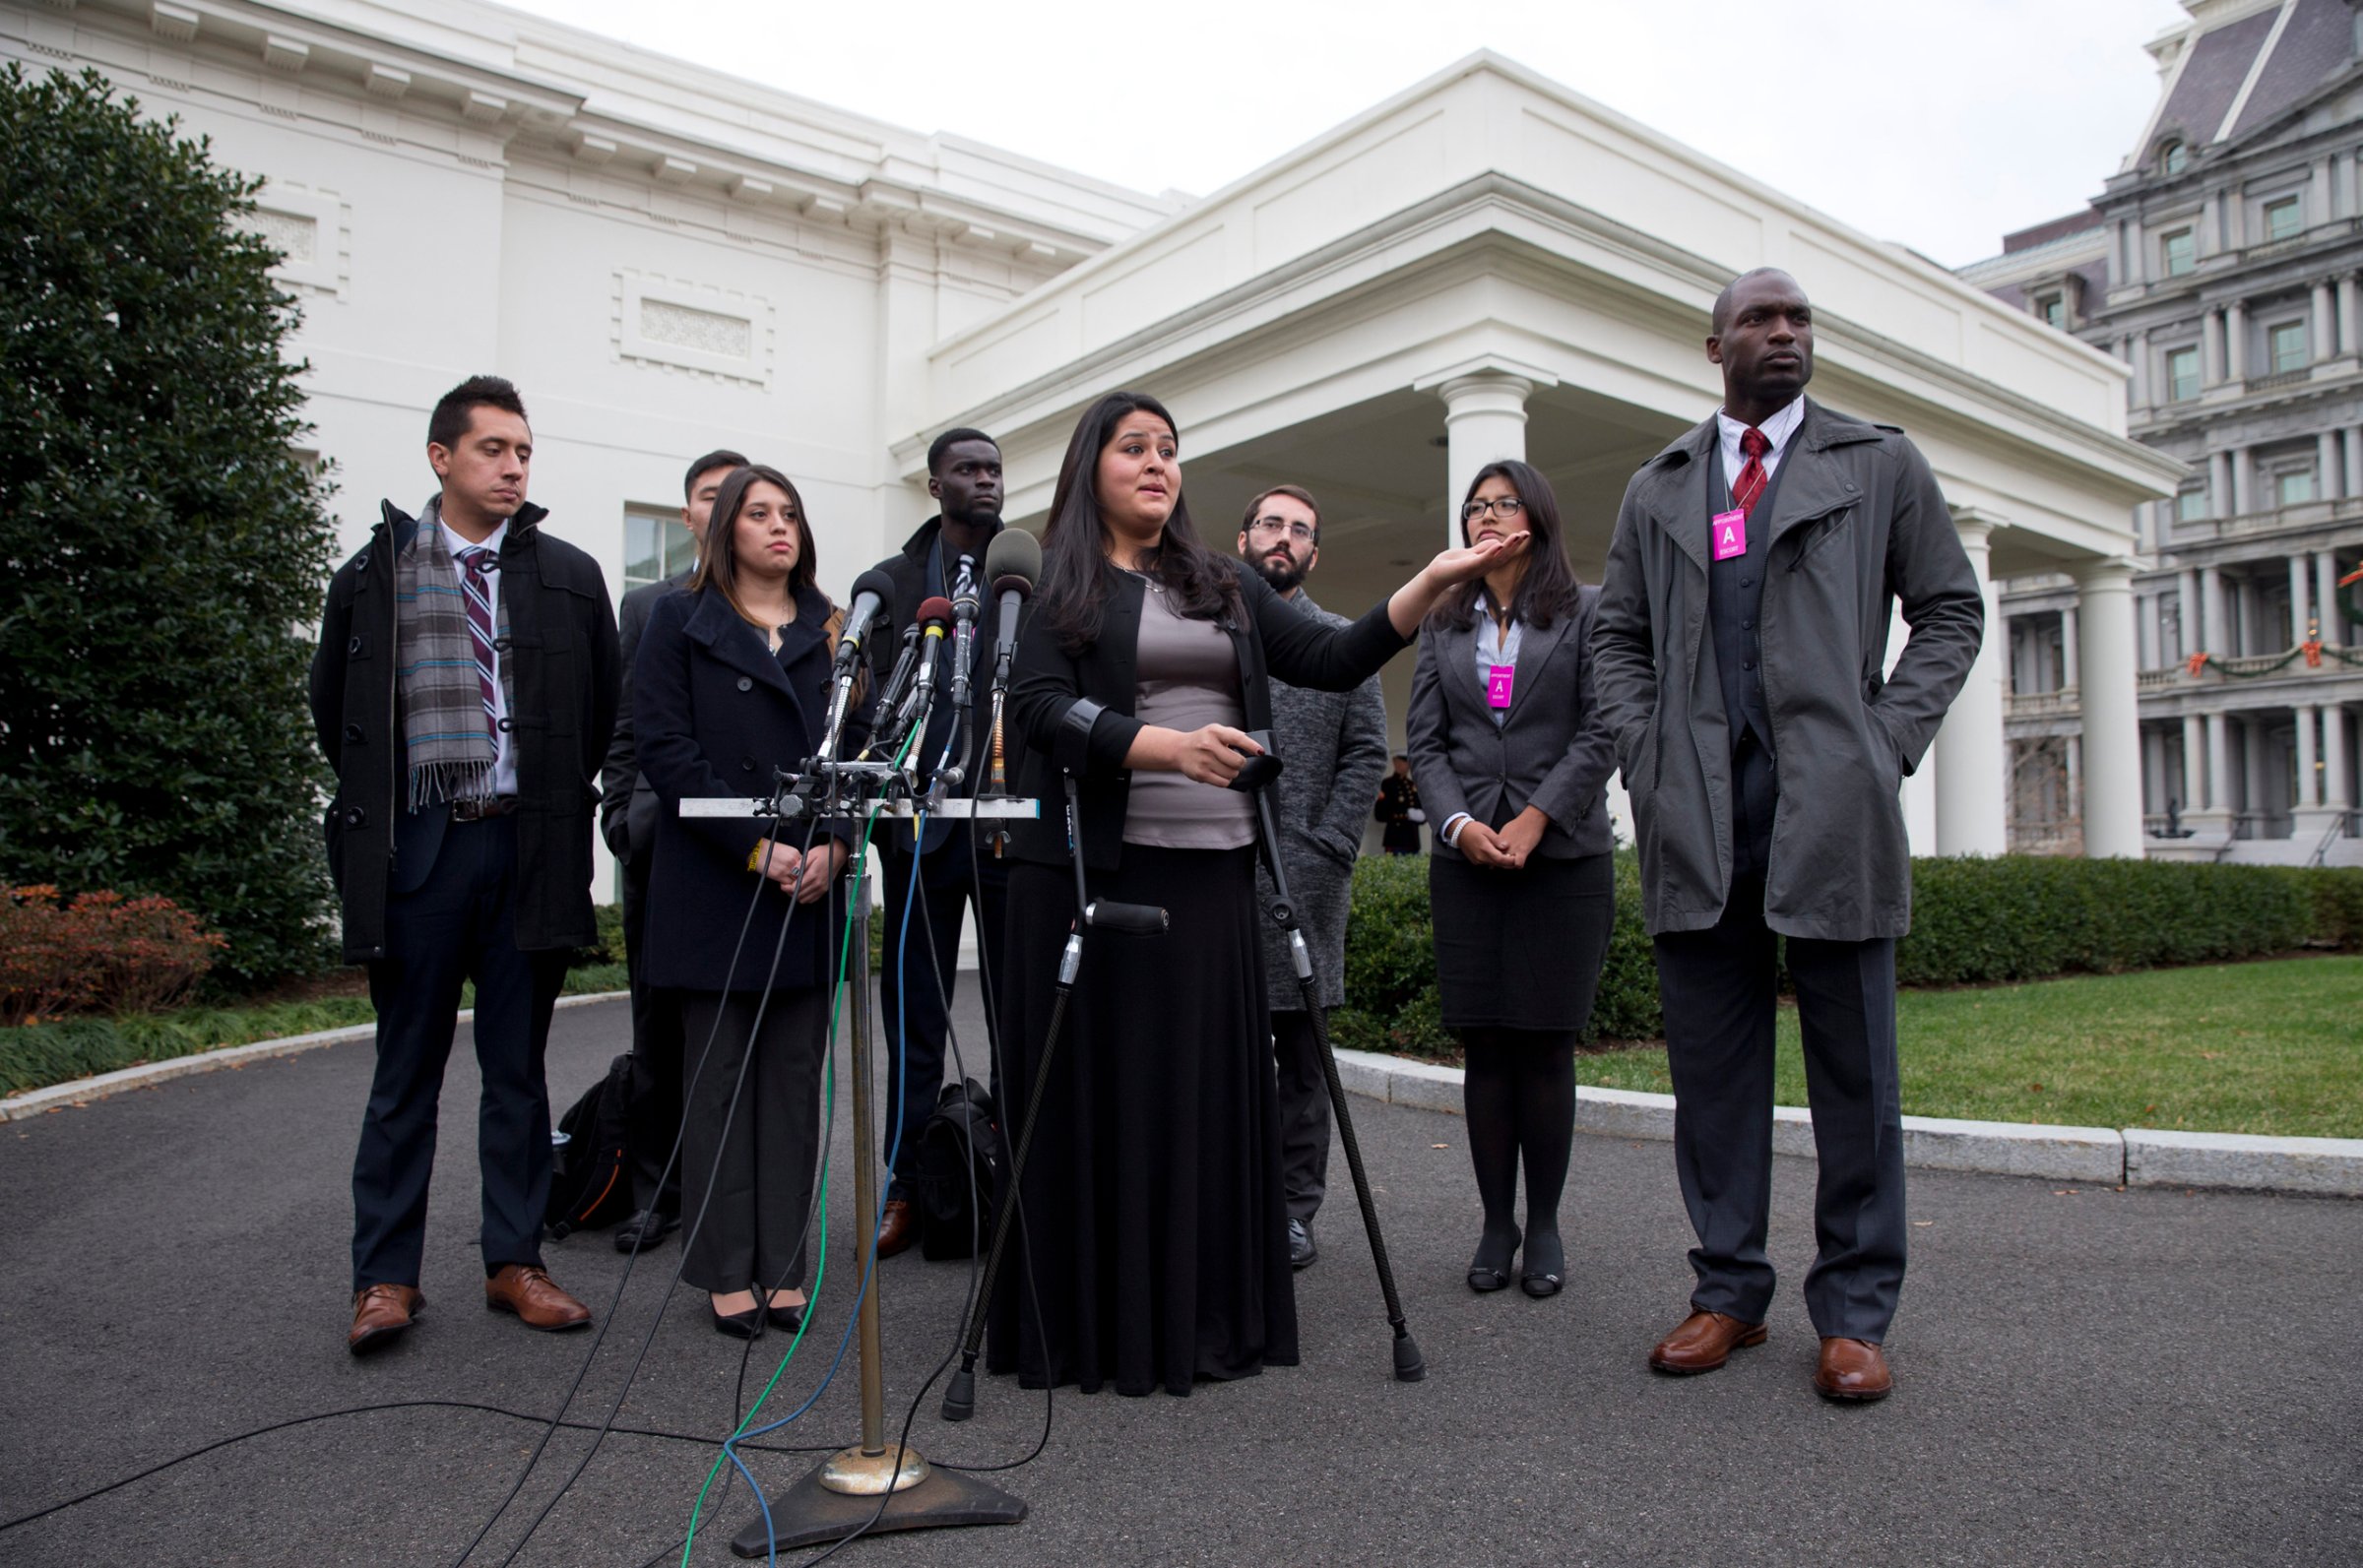 Lorella Praeli representing the group United We DREAM, with a group of immigrant youth who were eligible for the president's deferred action, speaks to the media on Dec. 4, 2014.